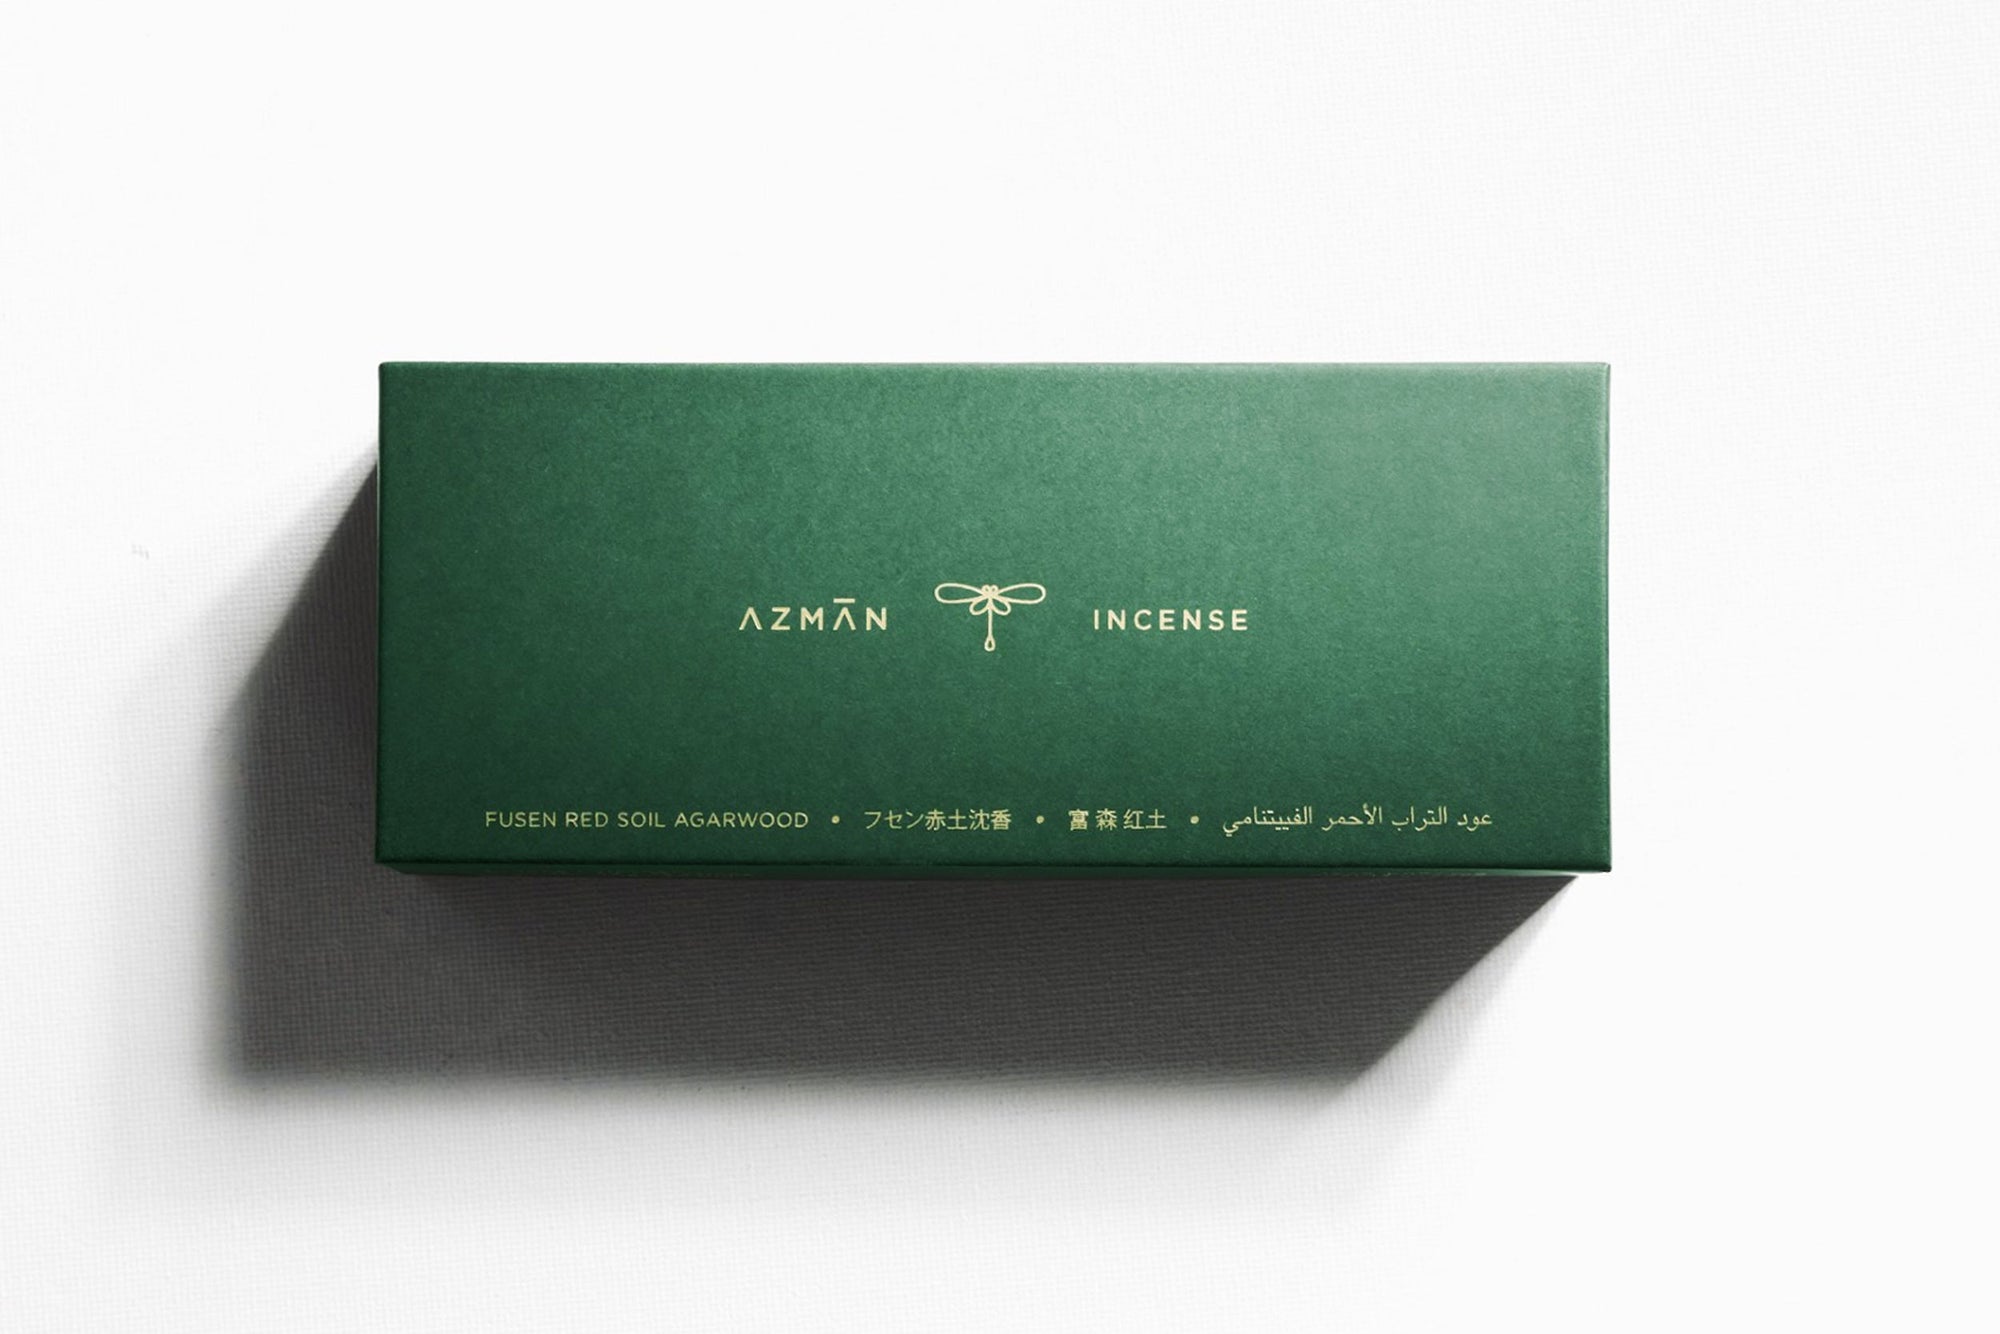 Azman Perfumes' rare and exclusive Incense product. The incense is presented in an elegant green luxury hard box and includes an incense stand and an information leaflet. All incense are 100% Organic, Chemical free, Handcrafted.